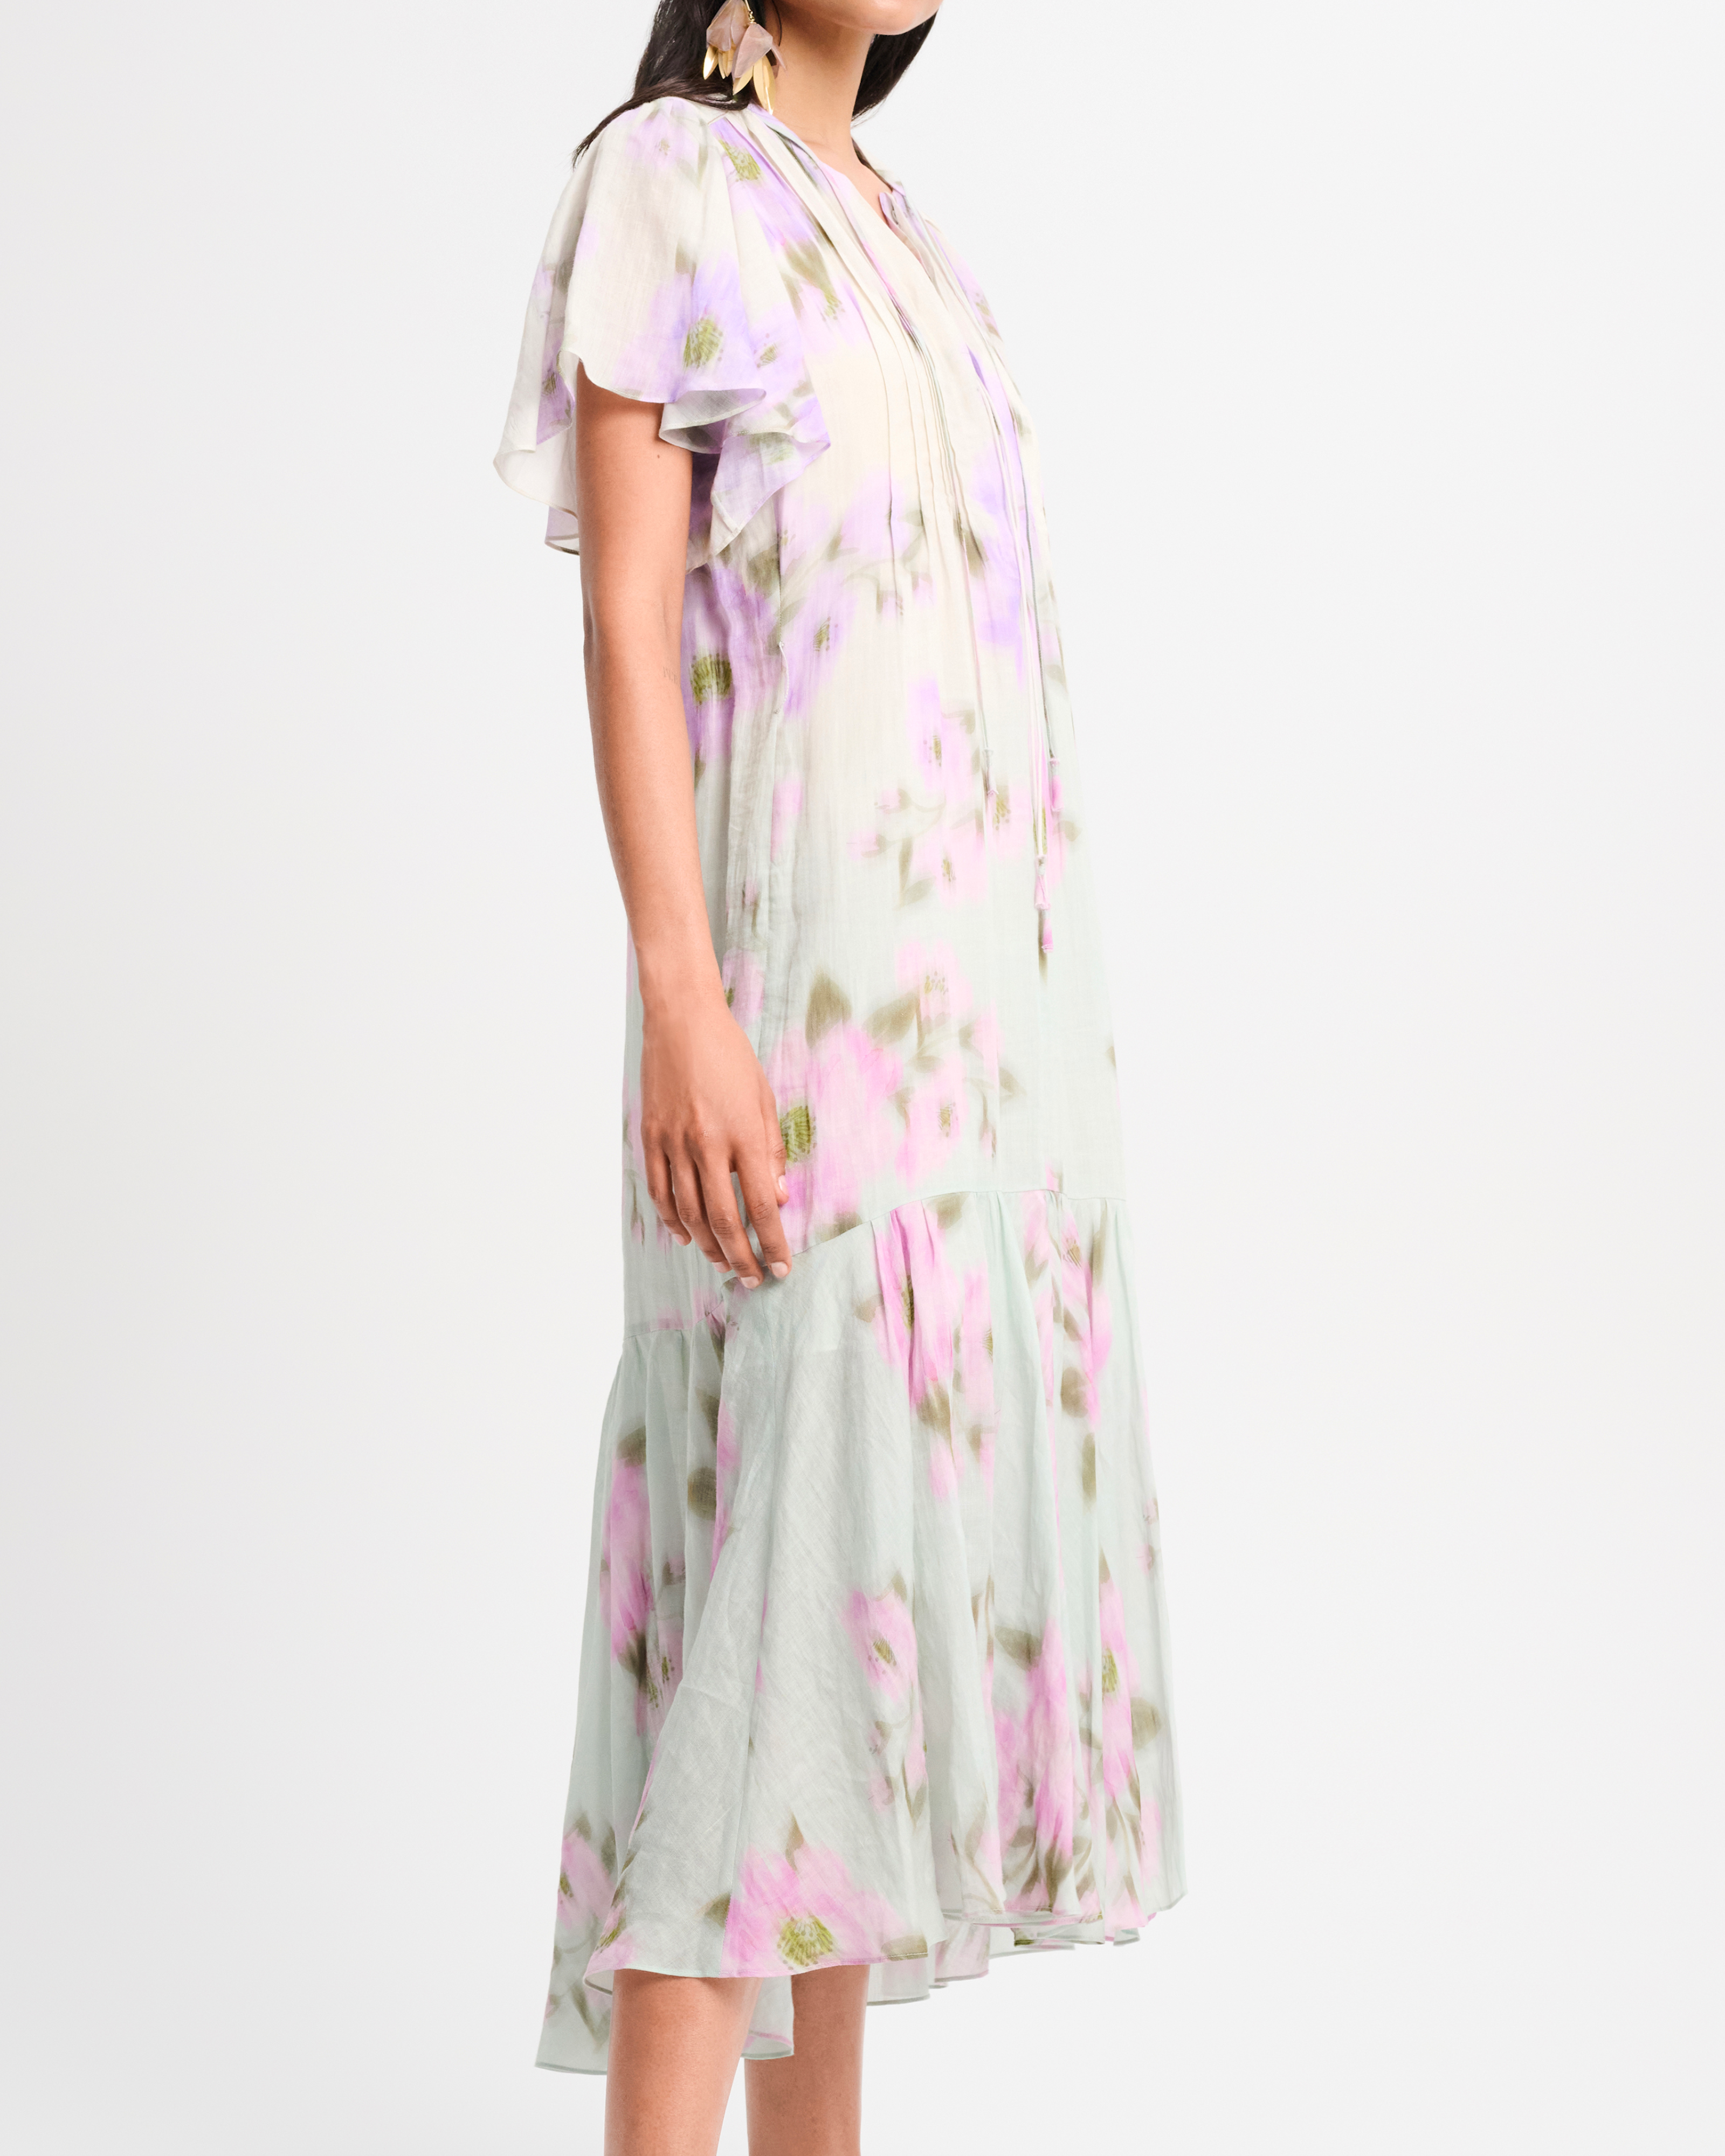 Dorothee Schumacher Blooming Volumes Dress in Cotton Candy